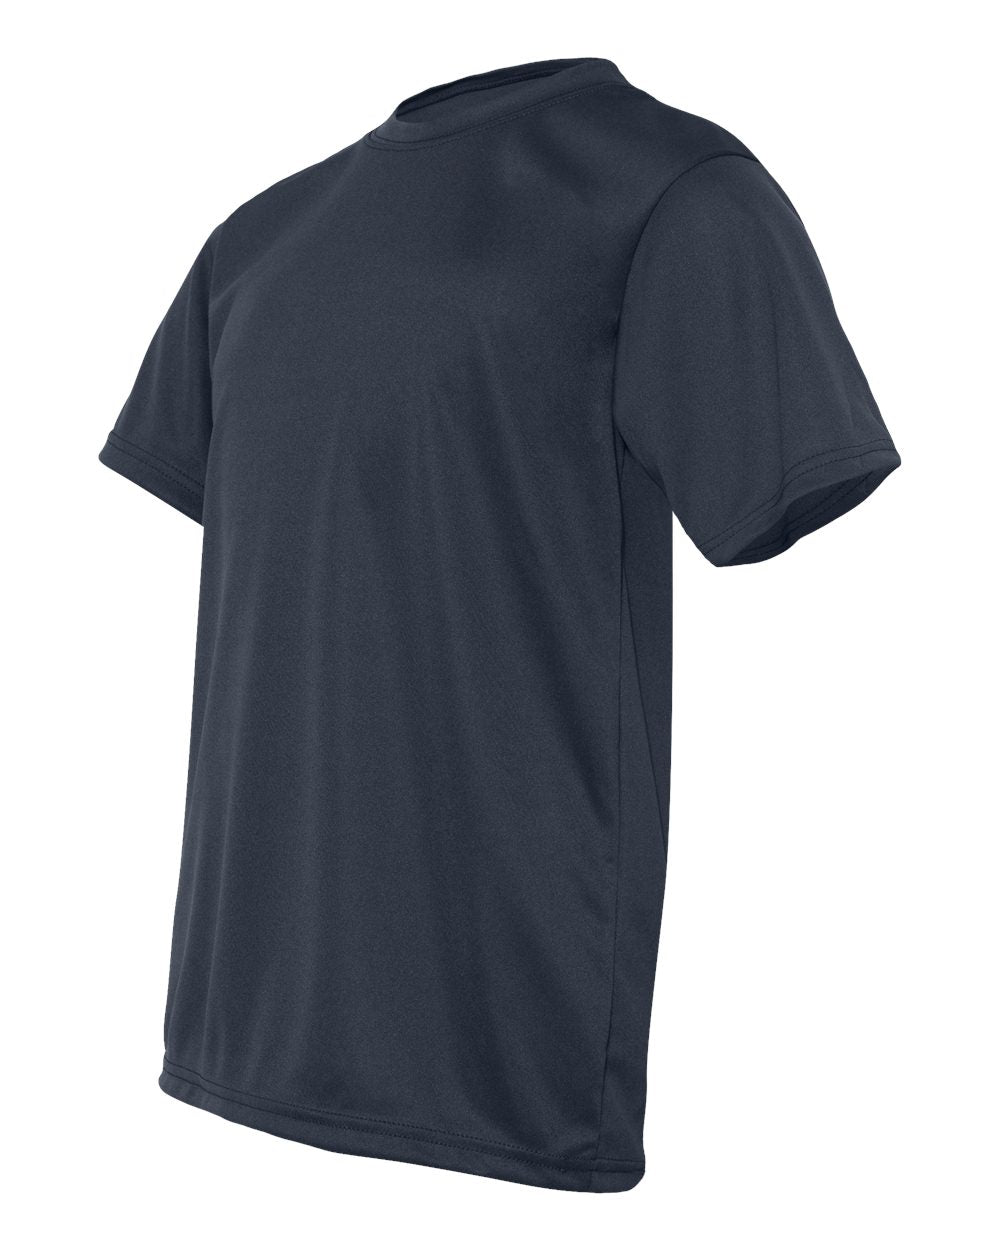 C2 Sport Youth Performance T-Shirt 5200 #color_Navy